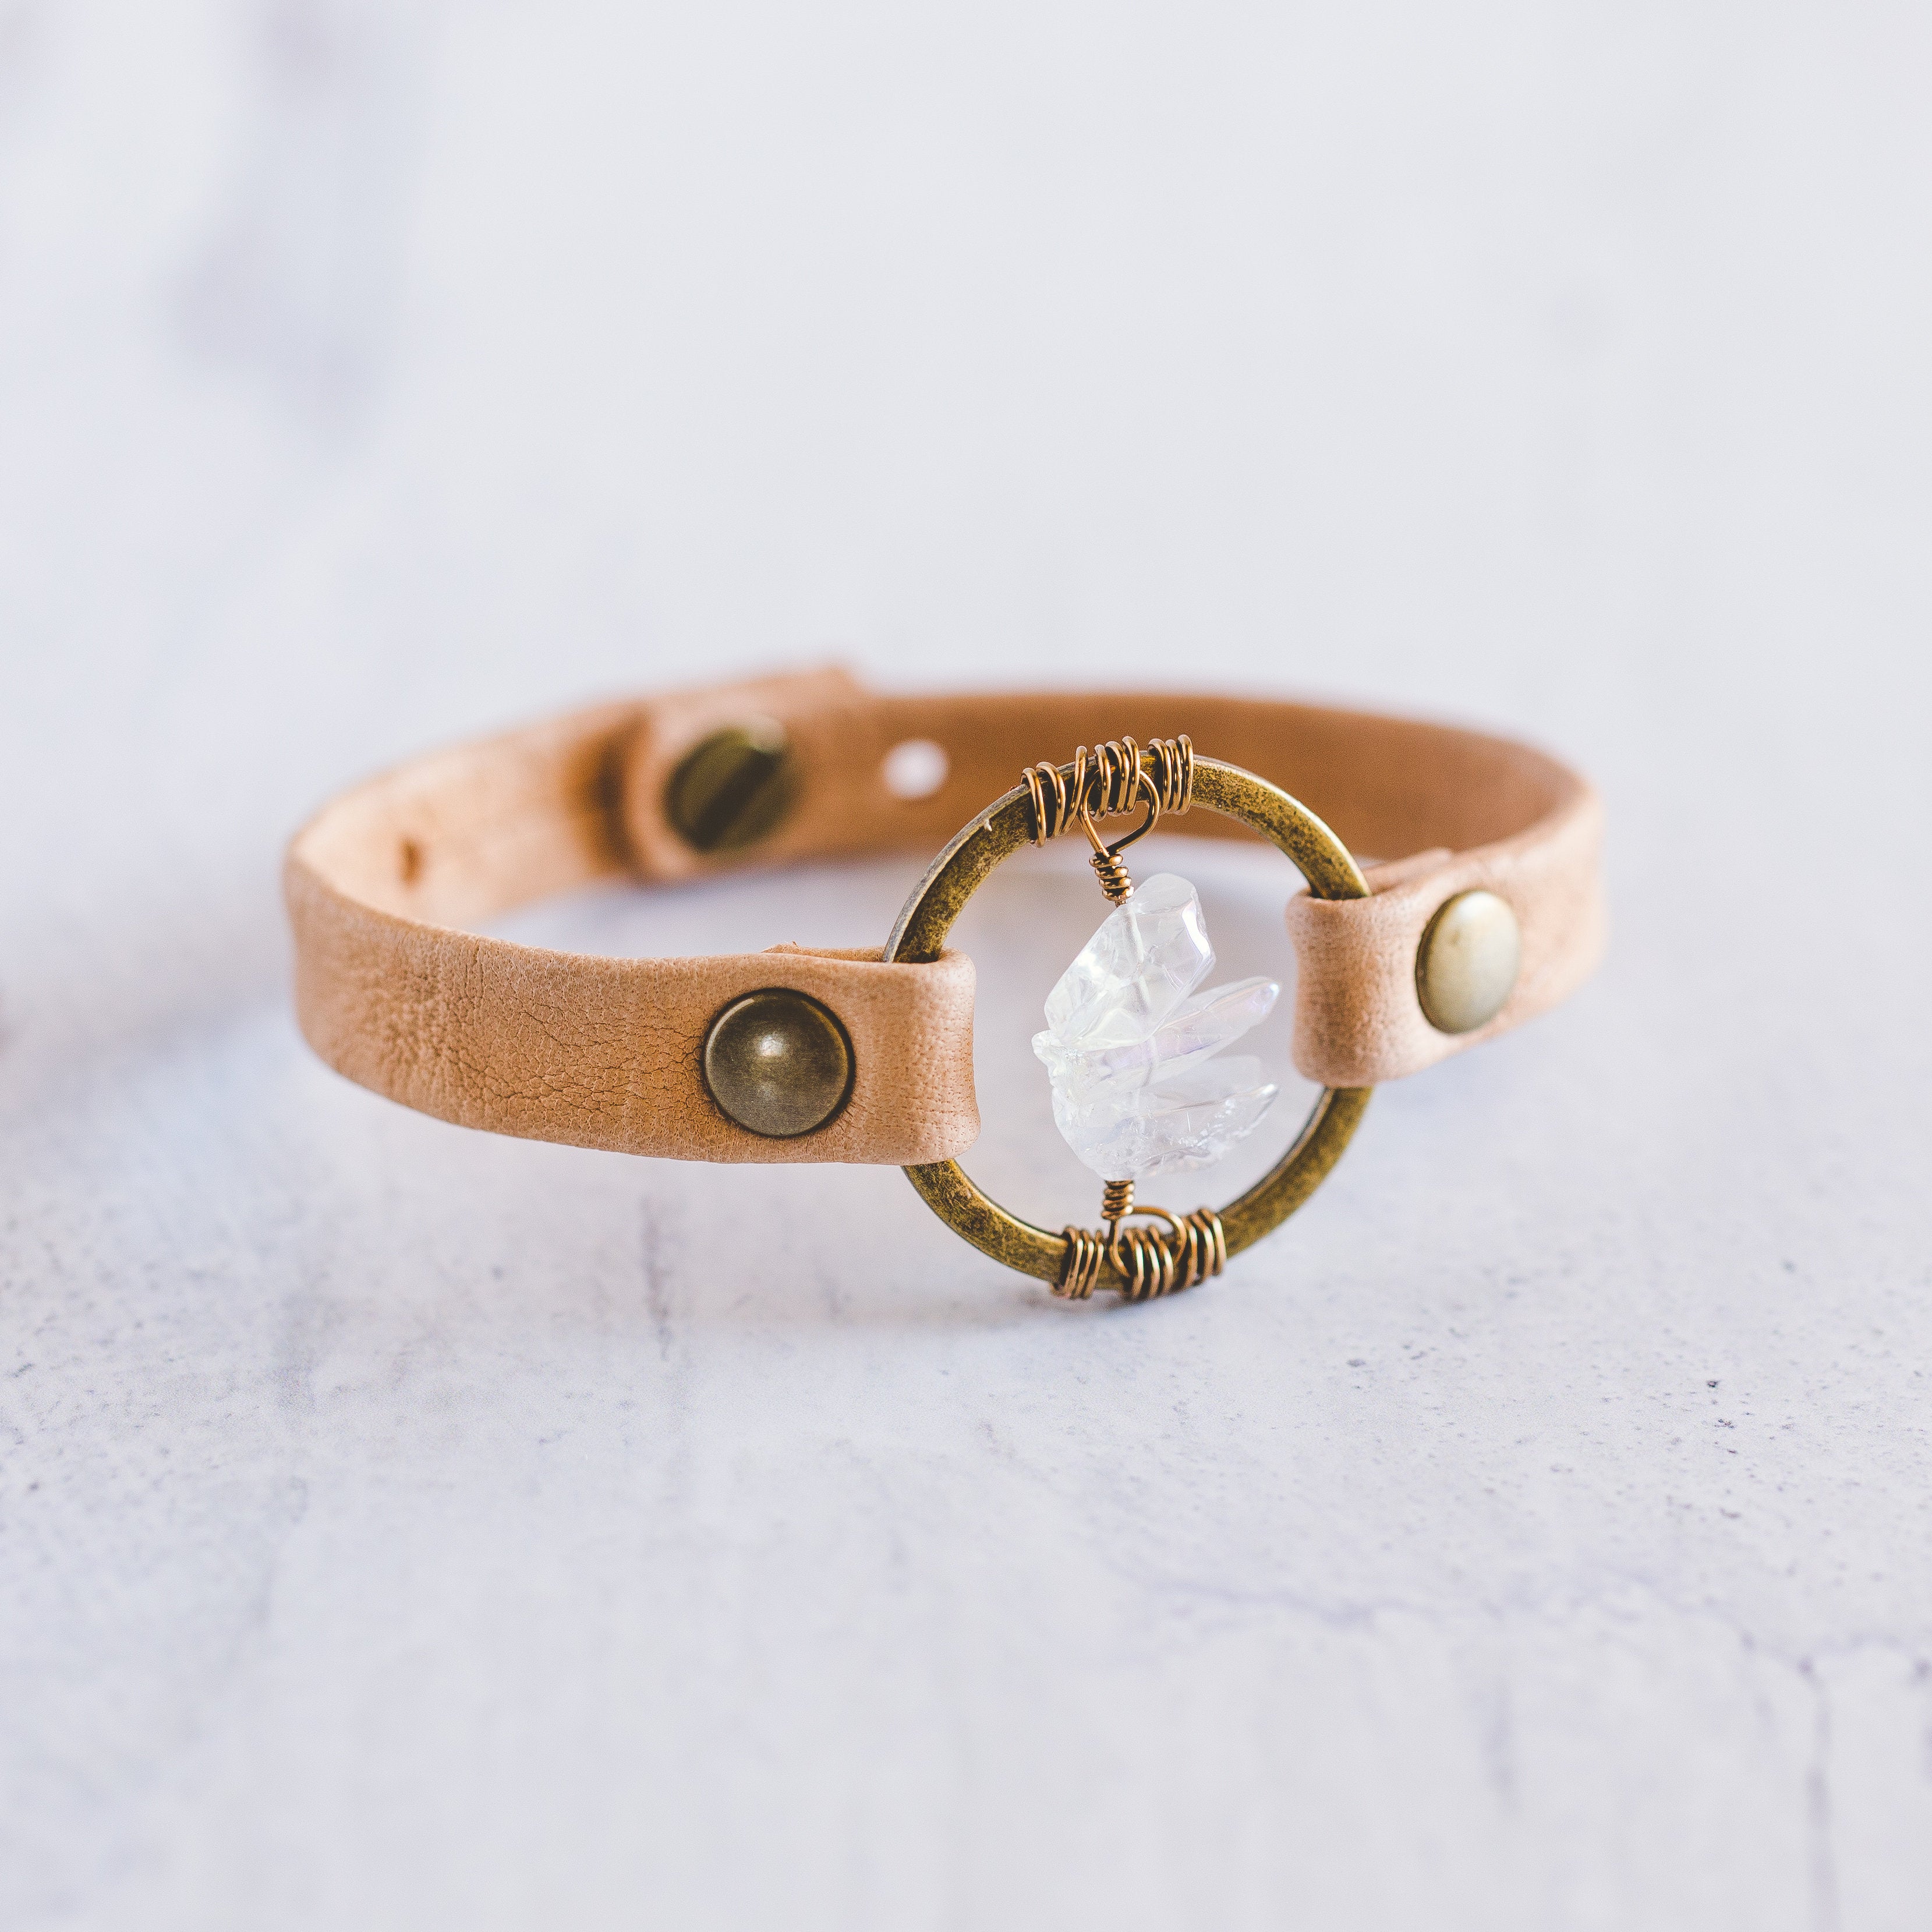 Antique Brass Be The Light Leather Bracelet in Sand Colored Leather With Three Clear Quartz Crystals